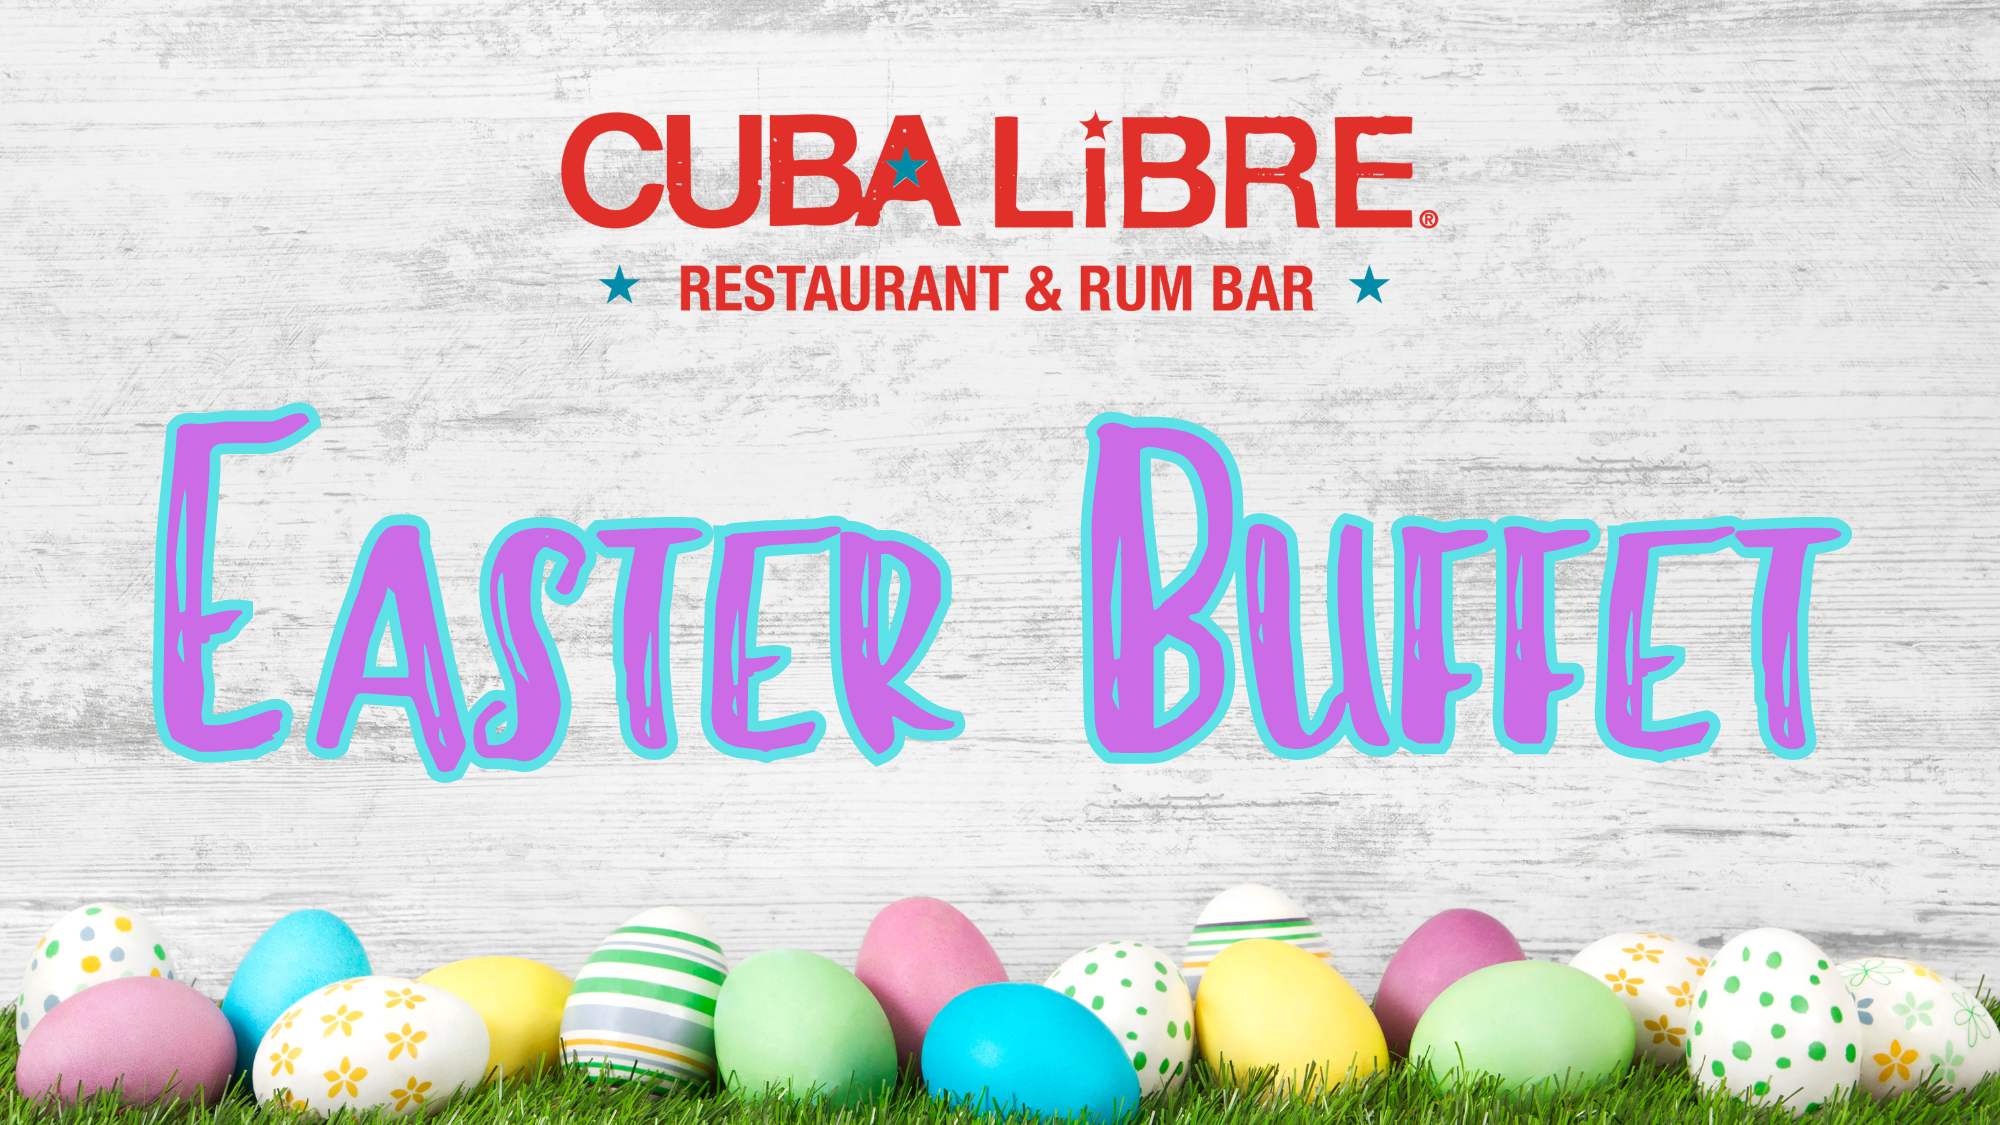 Promotional image that reads, "Easter Buffet" with Easter eggs on the bottom.